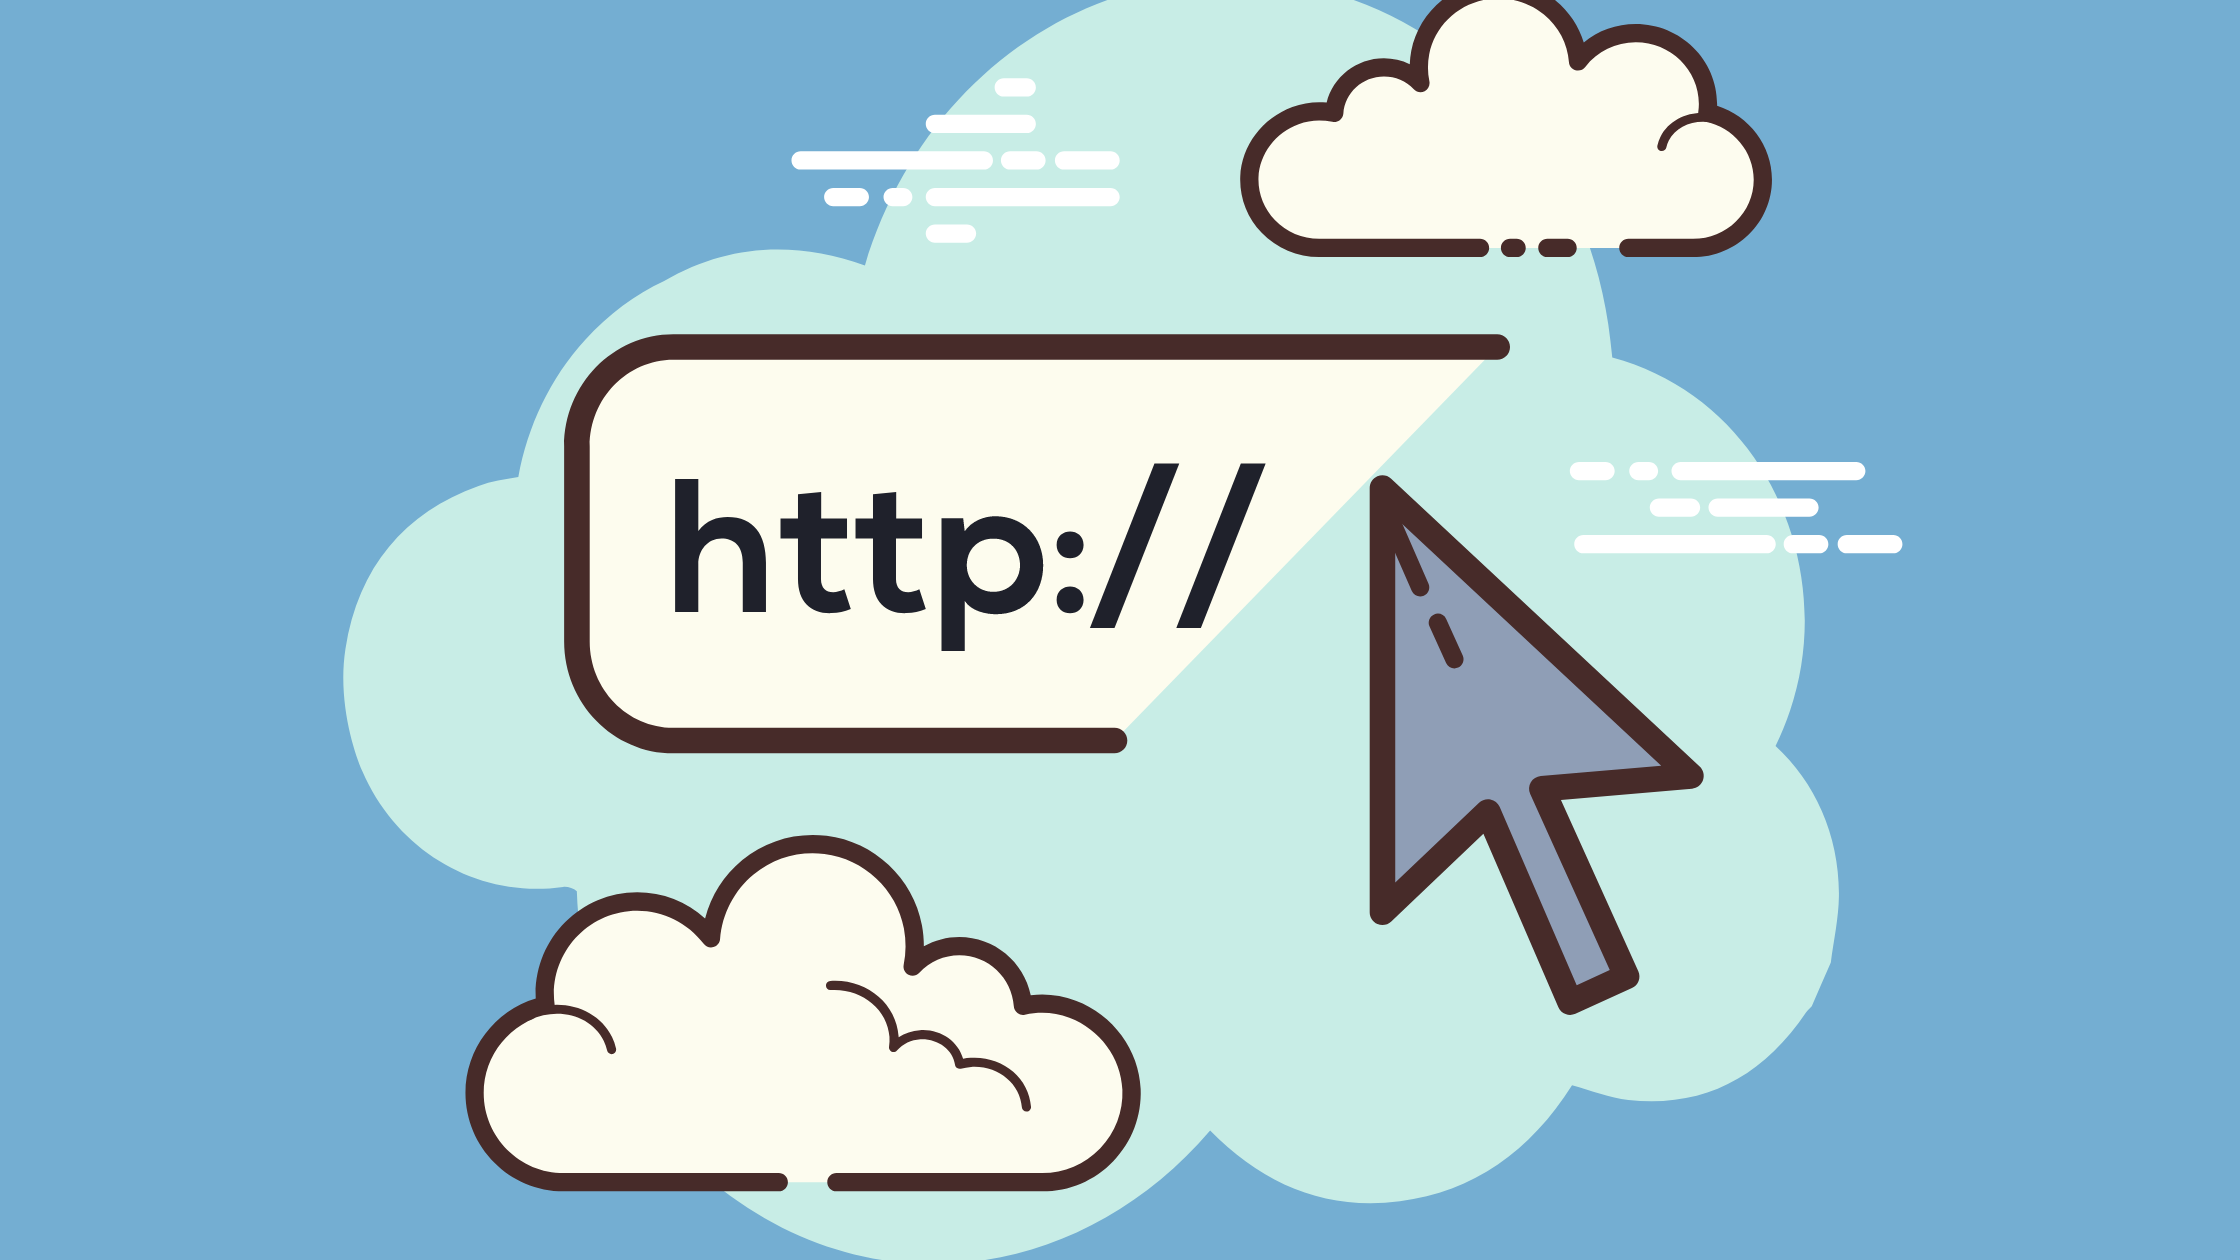 A graphic of a search bar surrounded by clouds